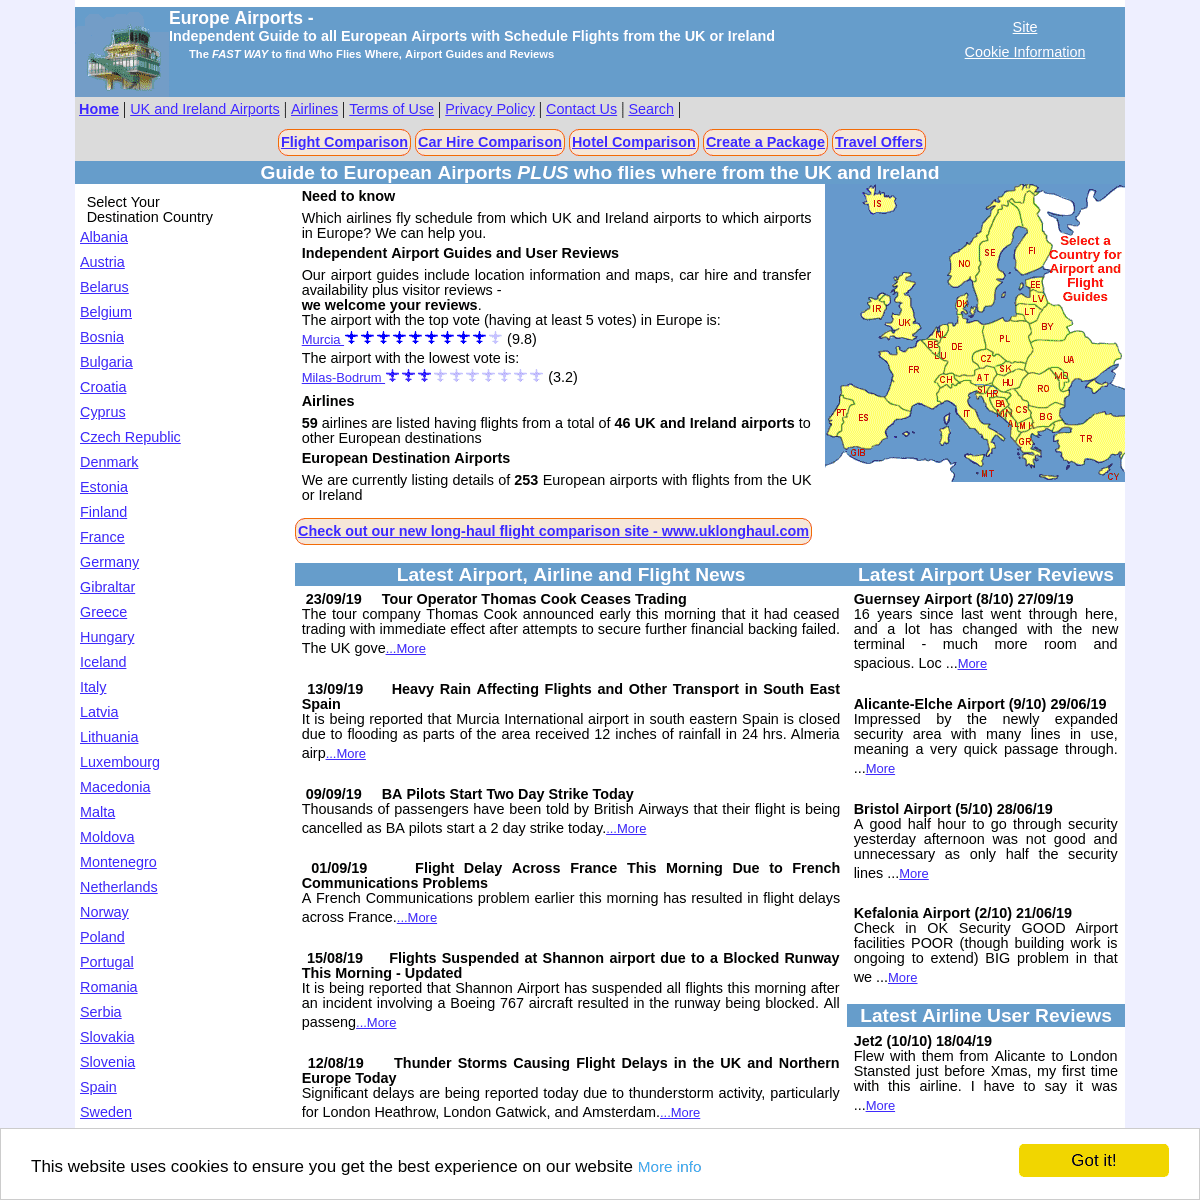 A complete backup of europe-airports.com